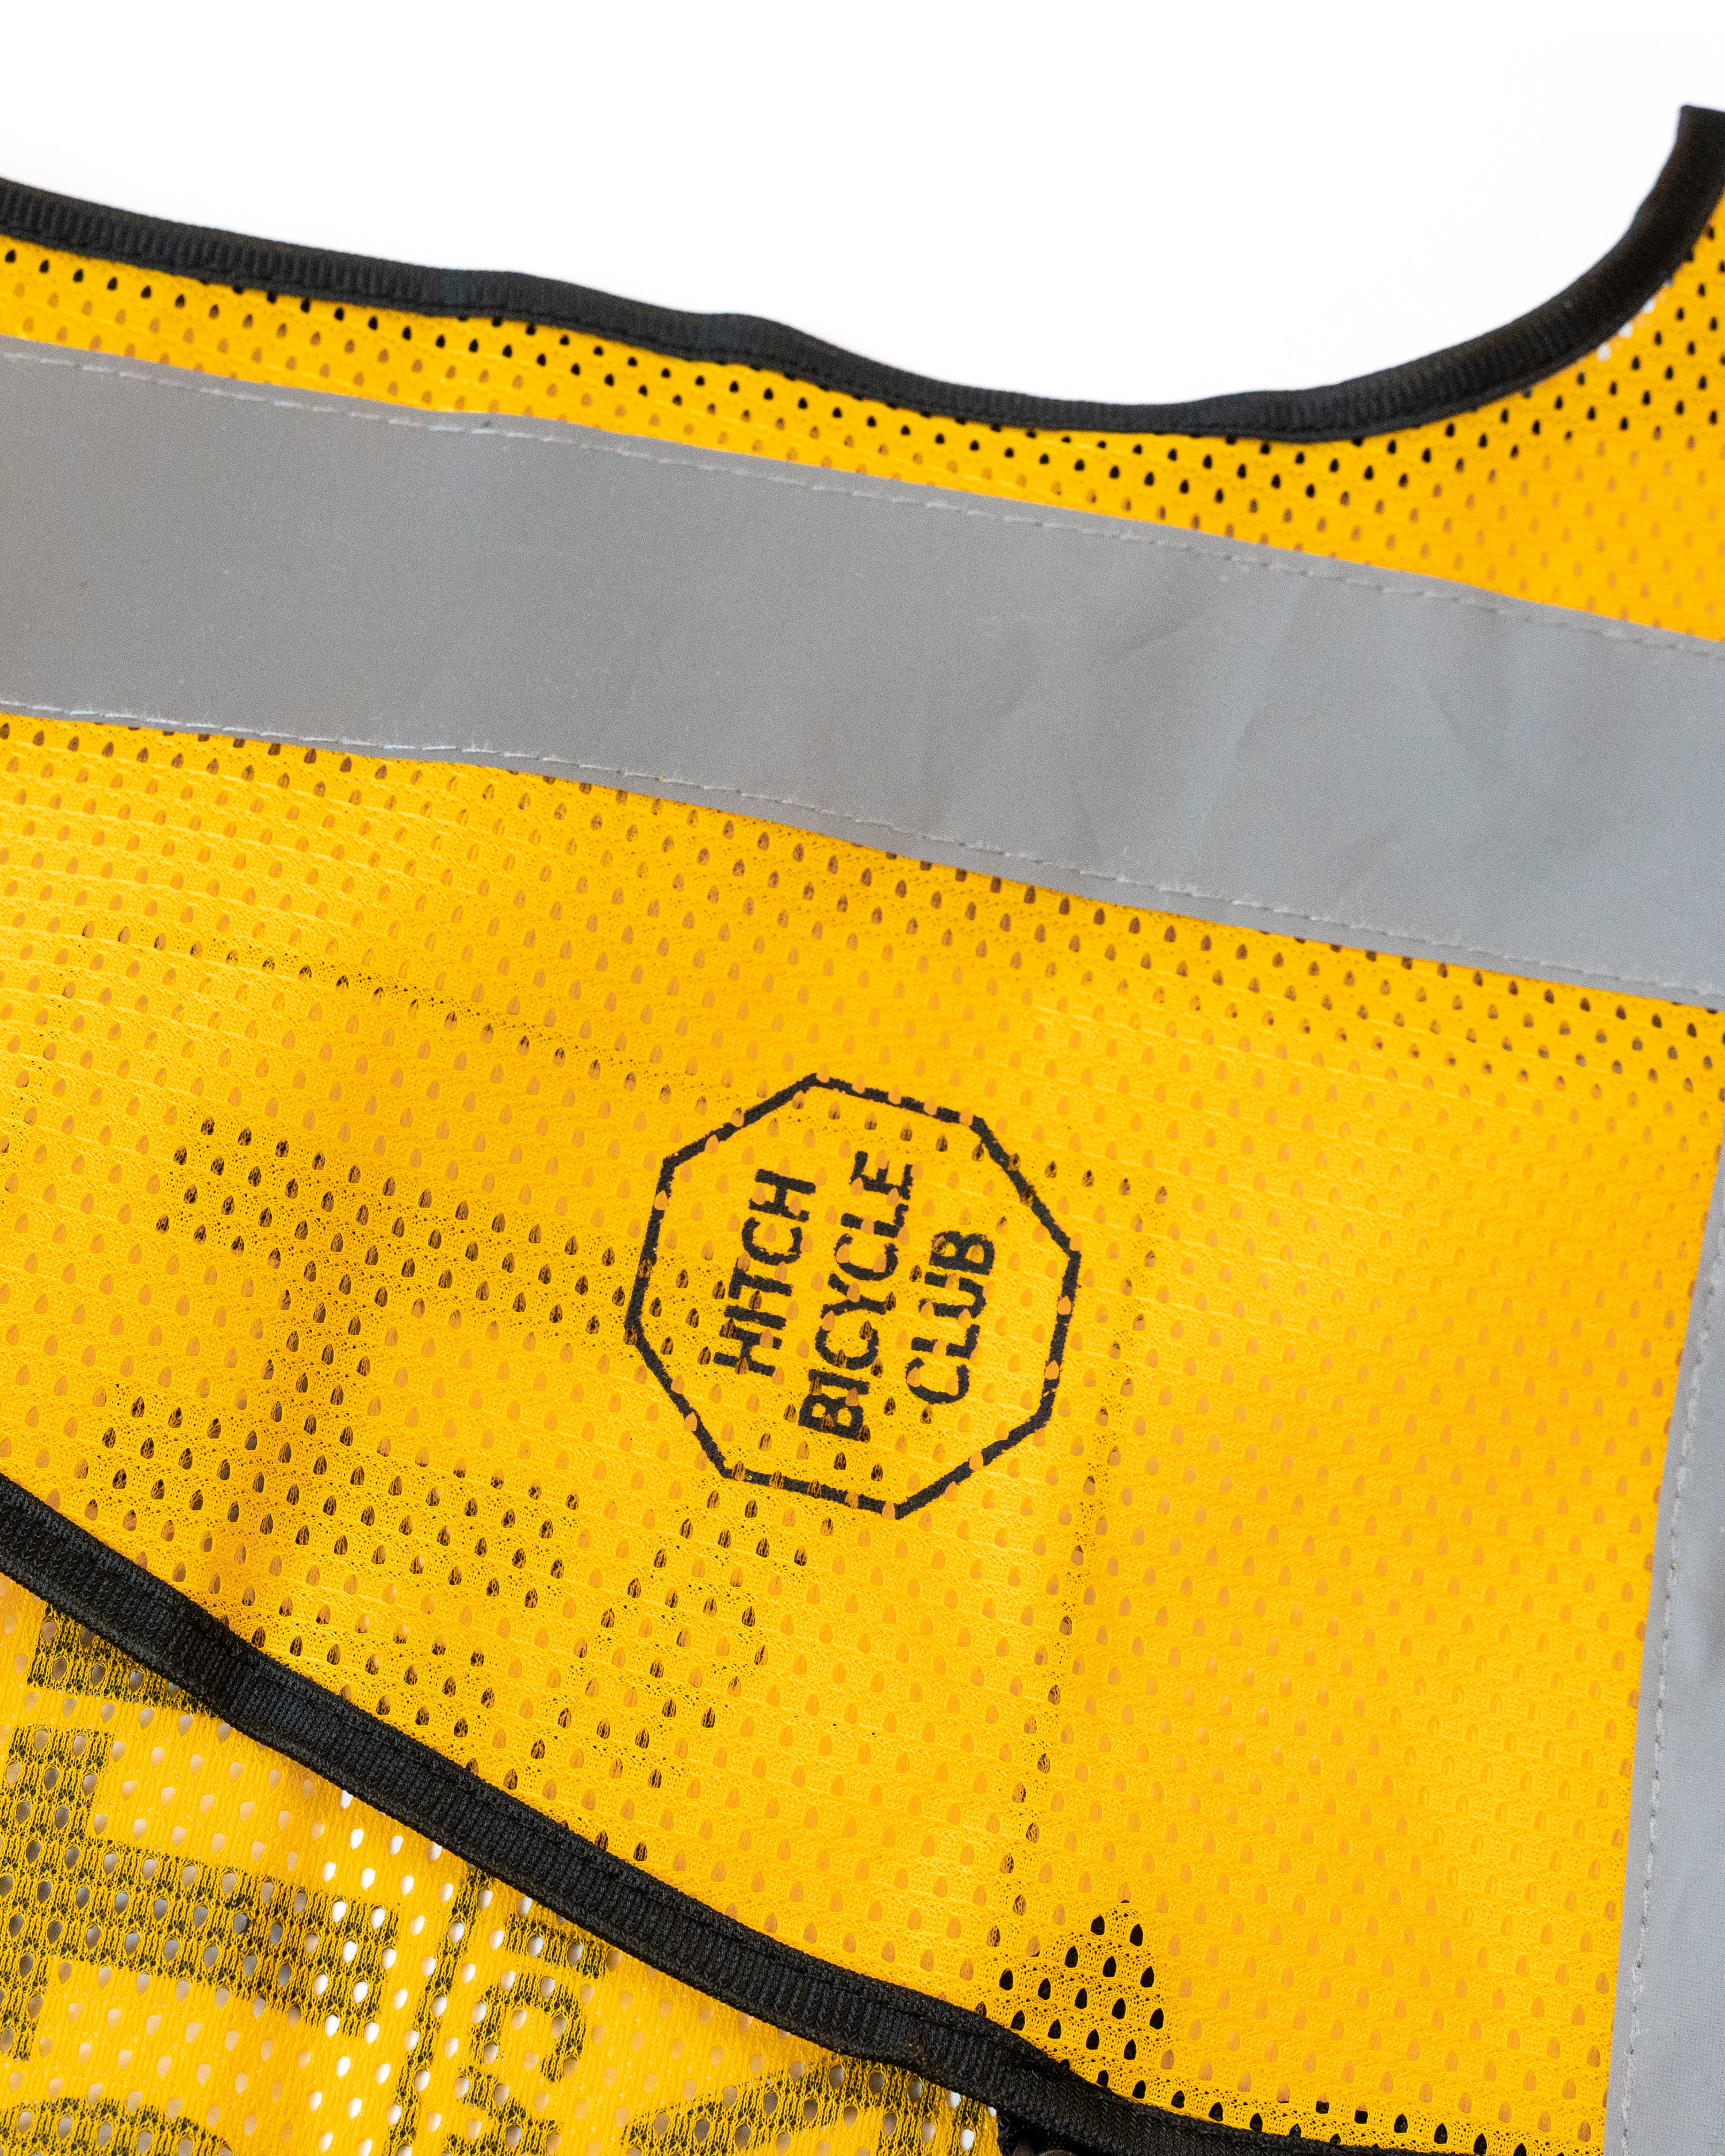 [out of stock] HBC Safety Vest - yellow